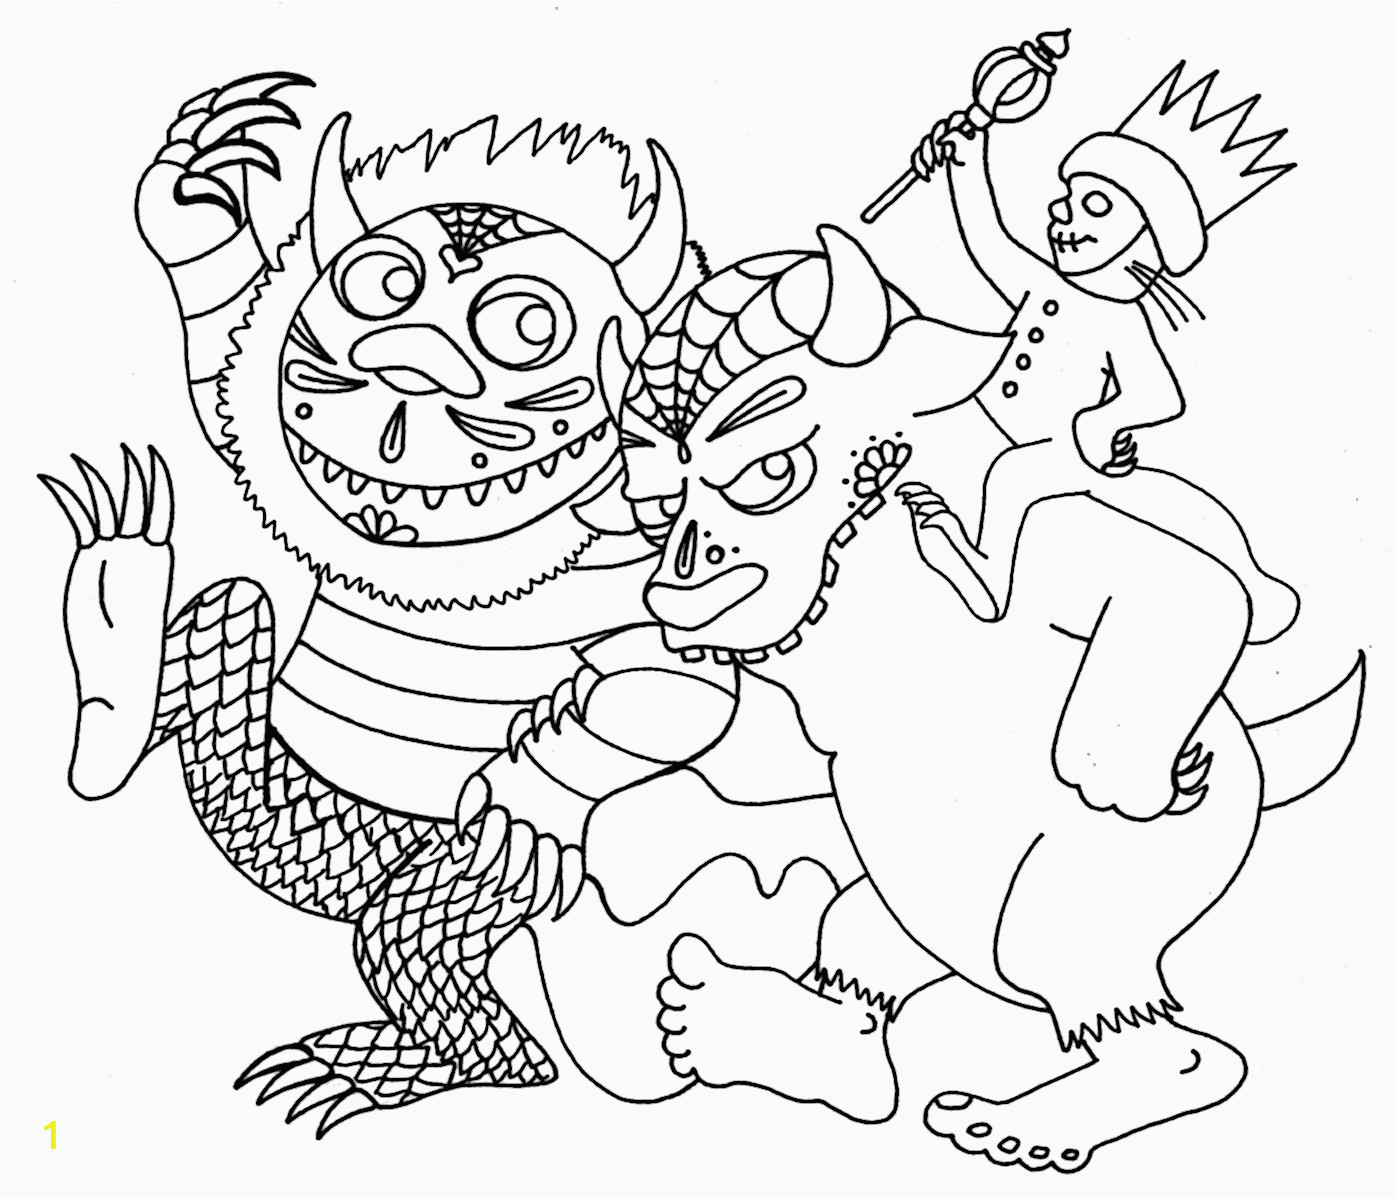 Where the Wild Things are Black and White Coloring Pages where the Wild Things are Printable Coloring Pages